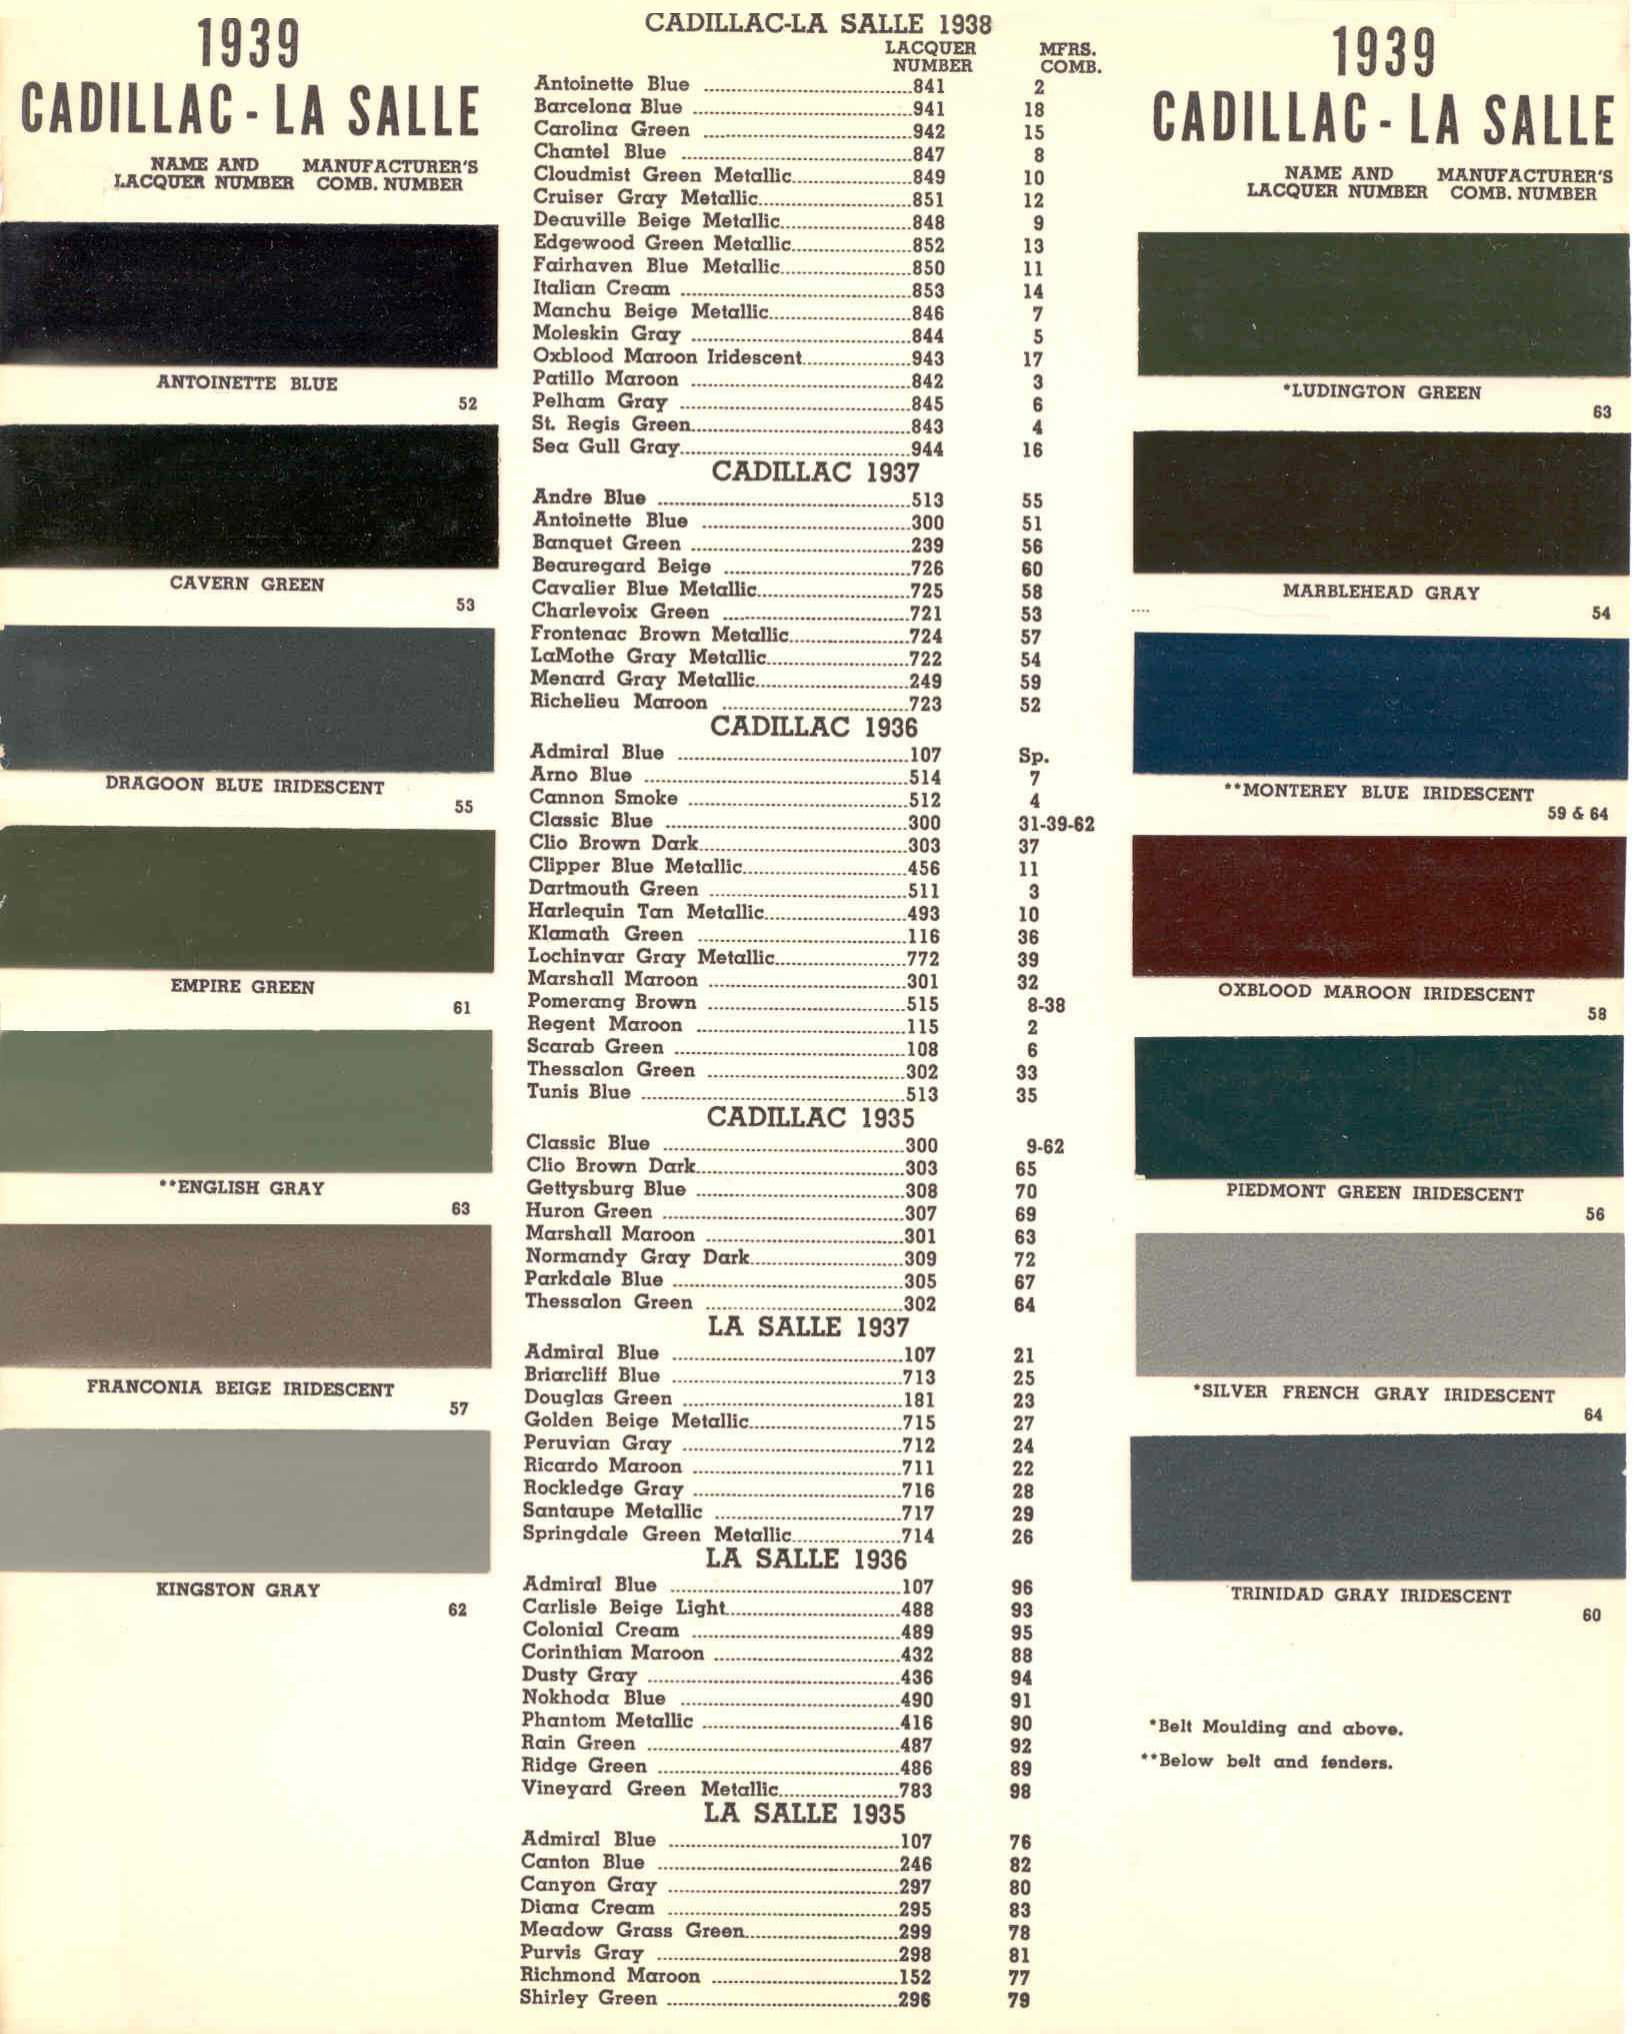 Exterior Colors used on 1939 Cadillac and LaSalle Vehicles